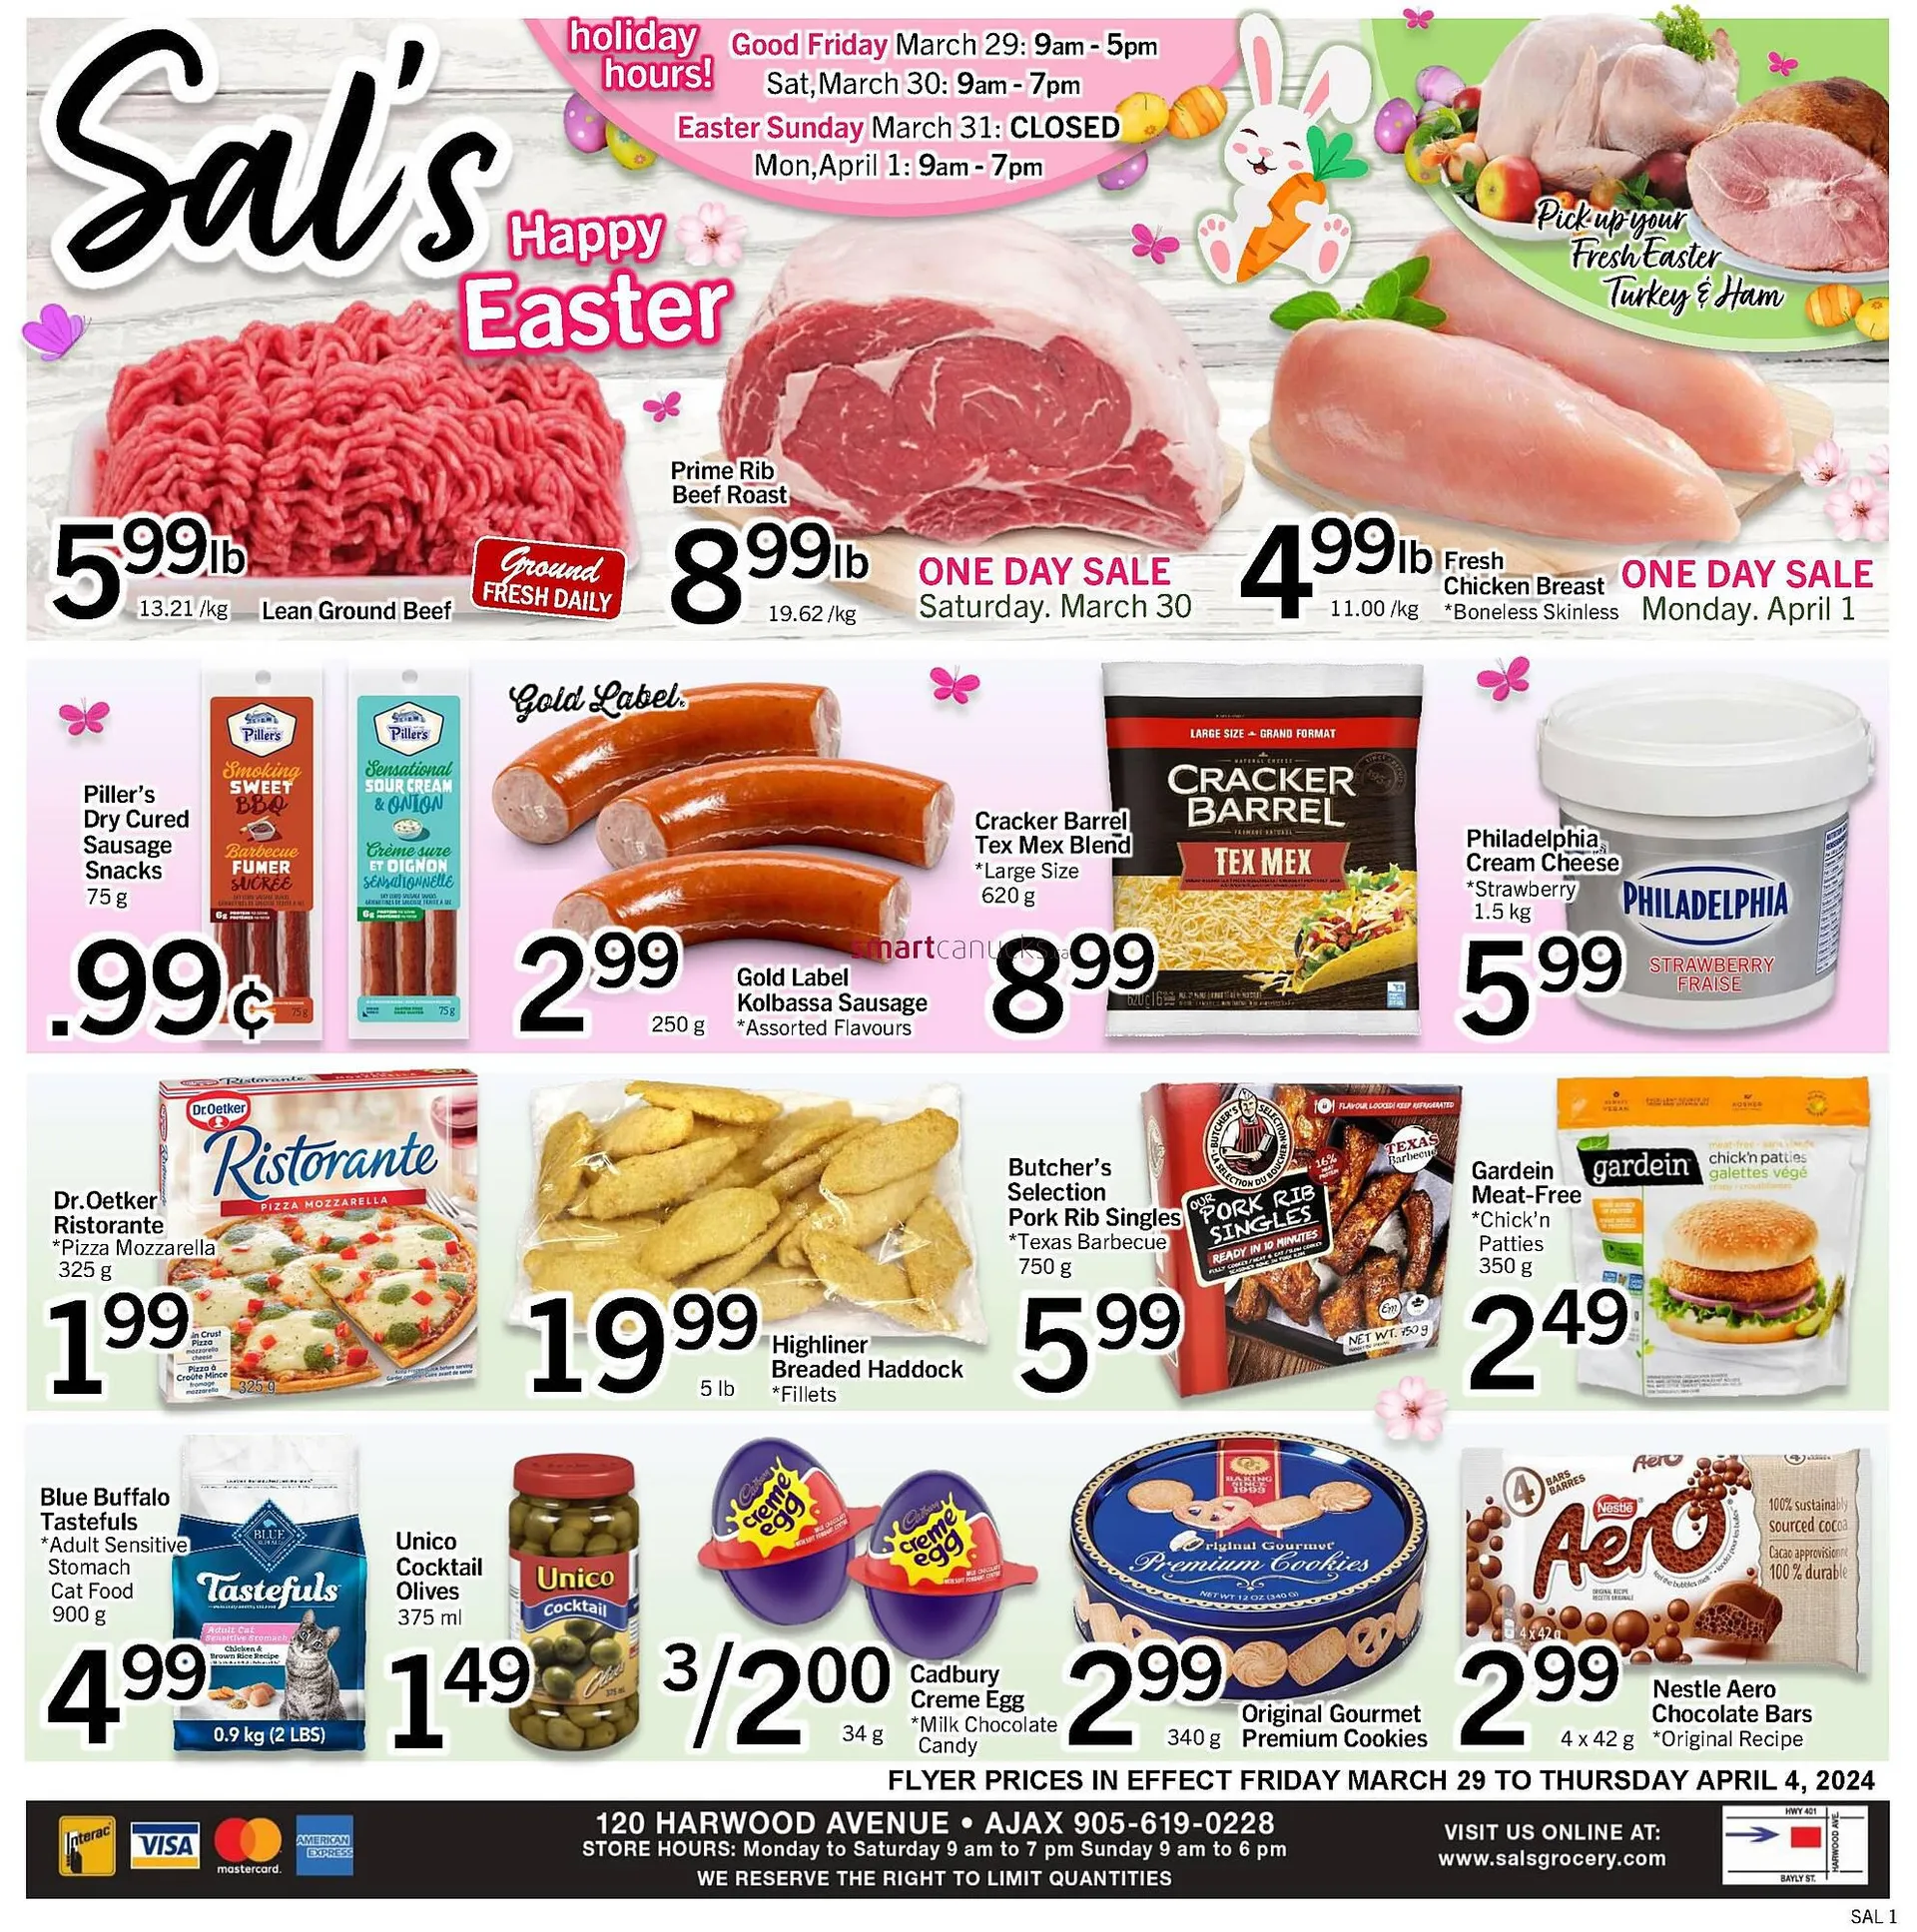 Sal's Grocery flyer from March 29 to April 4 2024 - flyer page 1